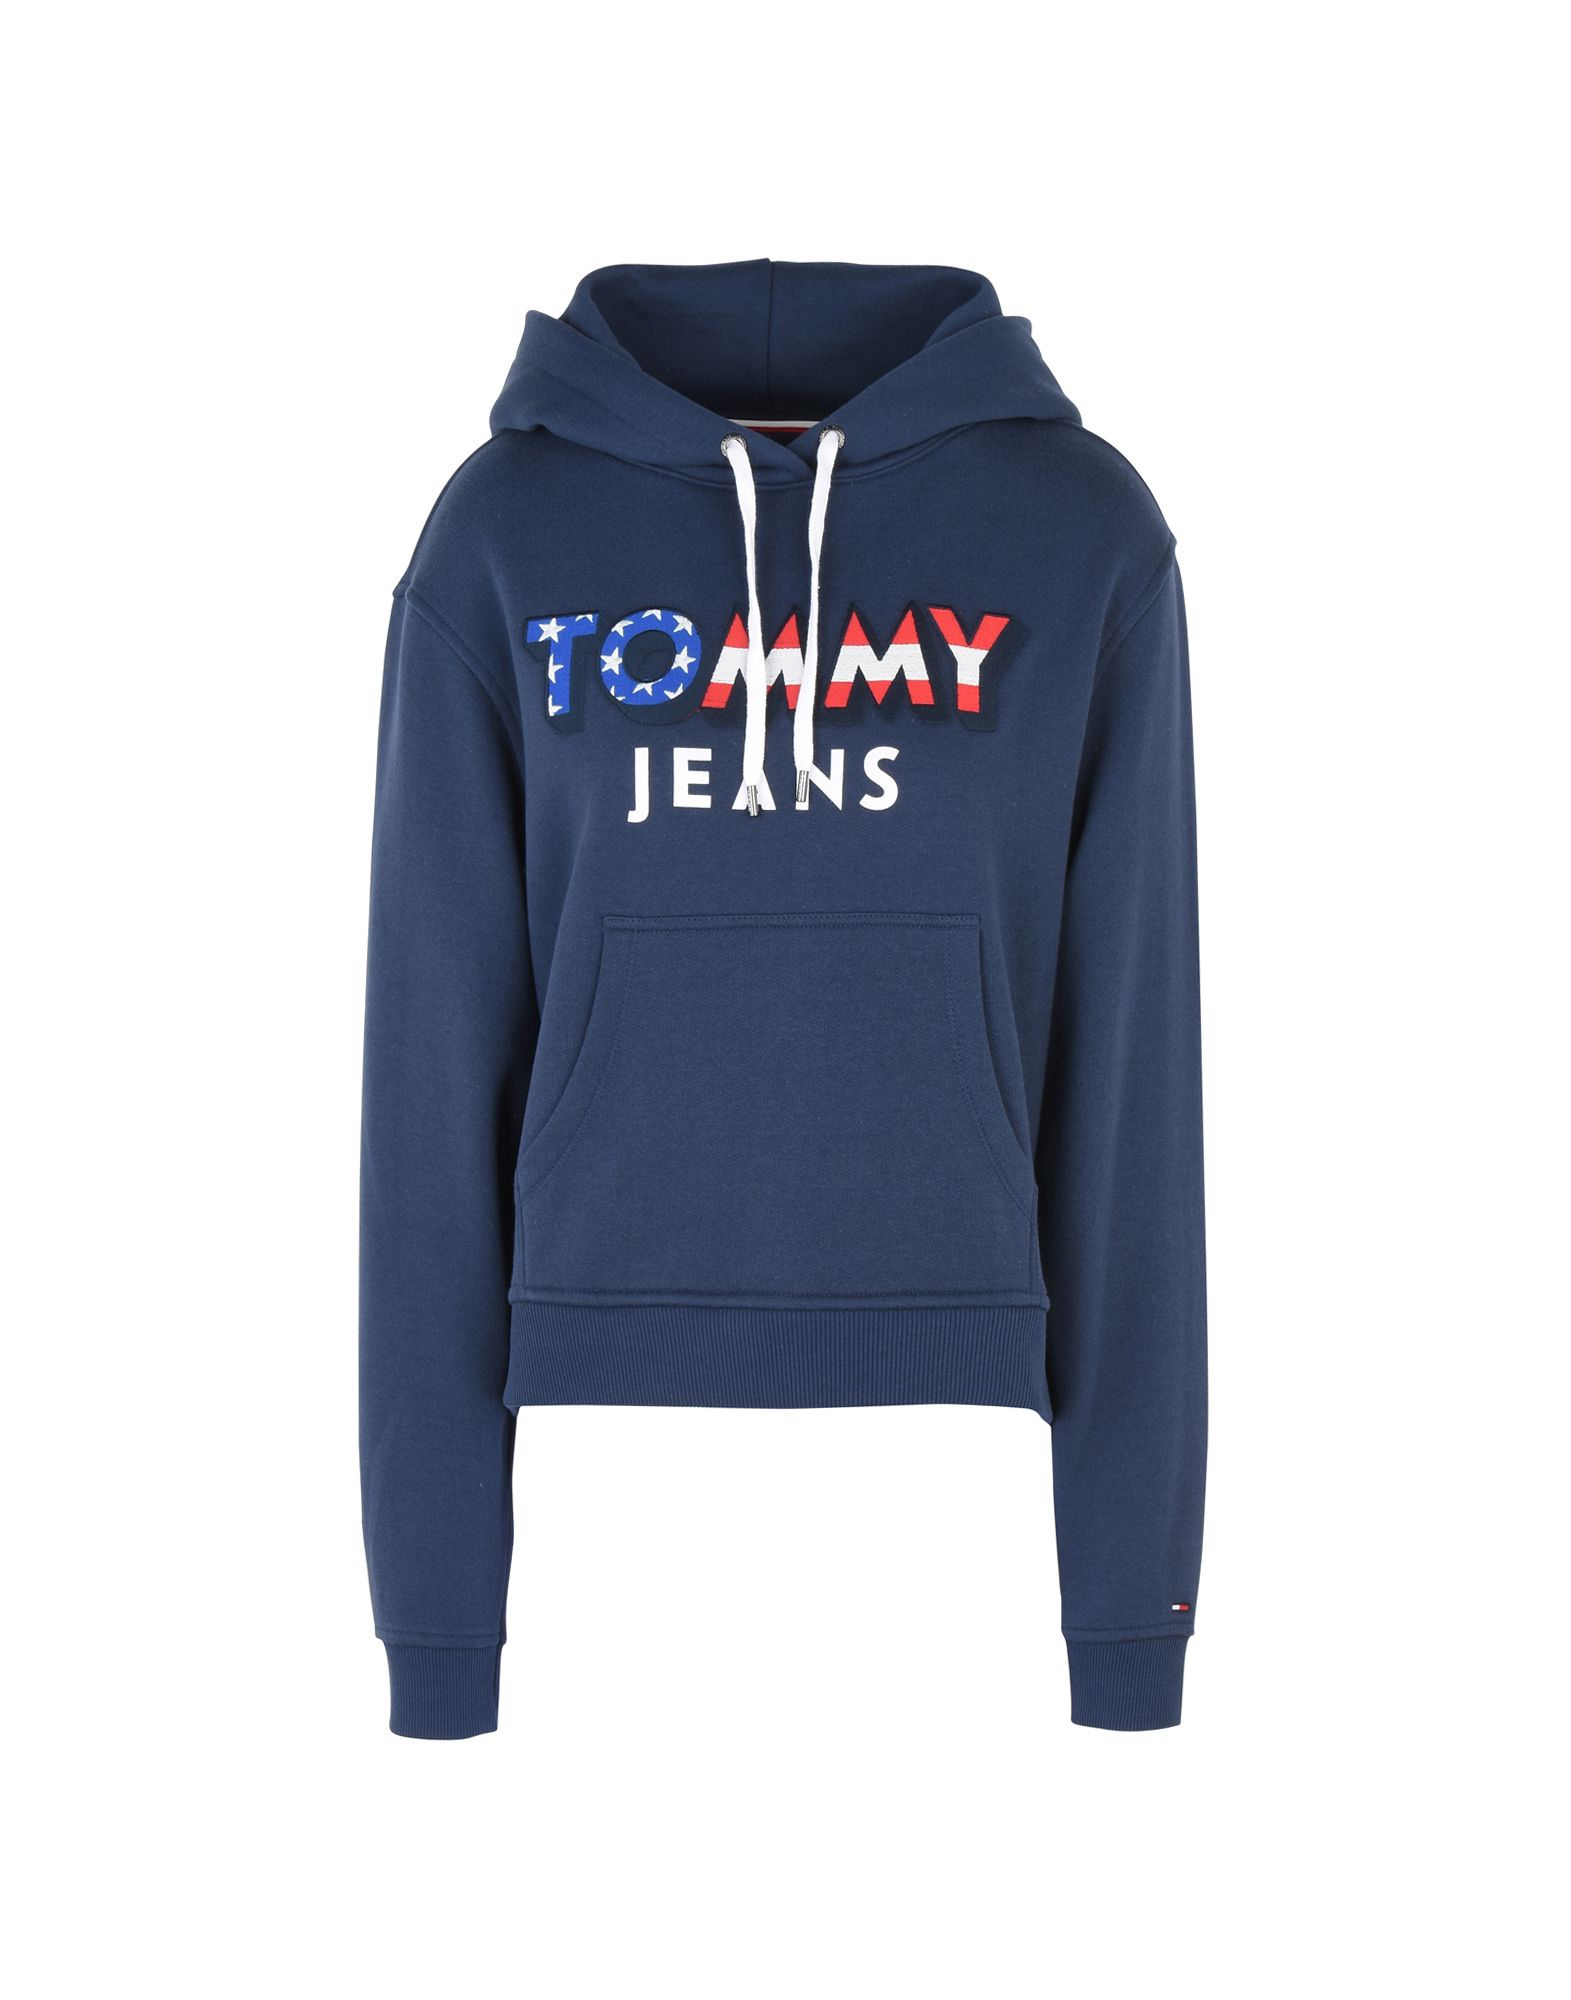 TOMMY JEANS TOMMY JEANS,12175862CG 6